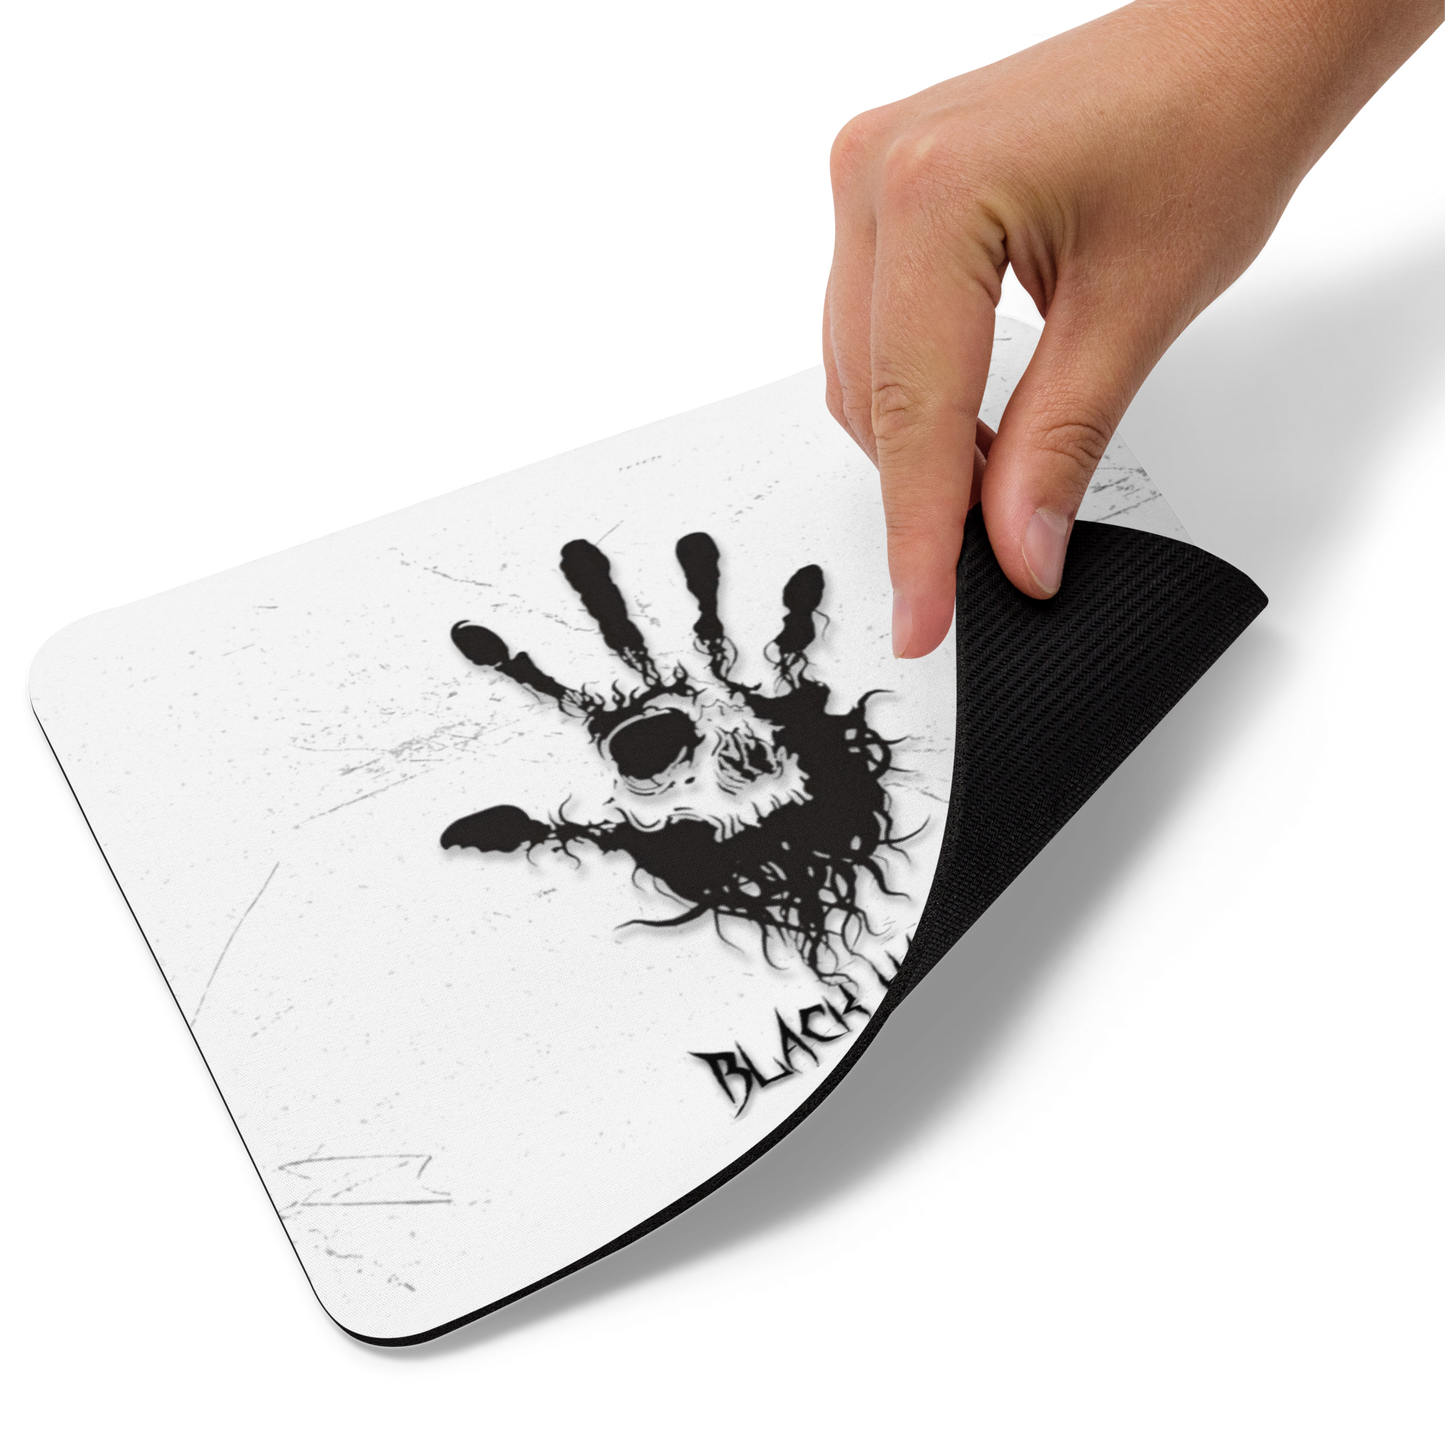 Black Hand Mouse pad